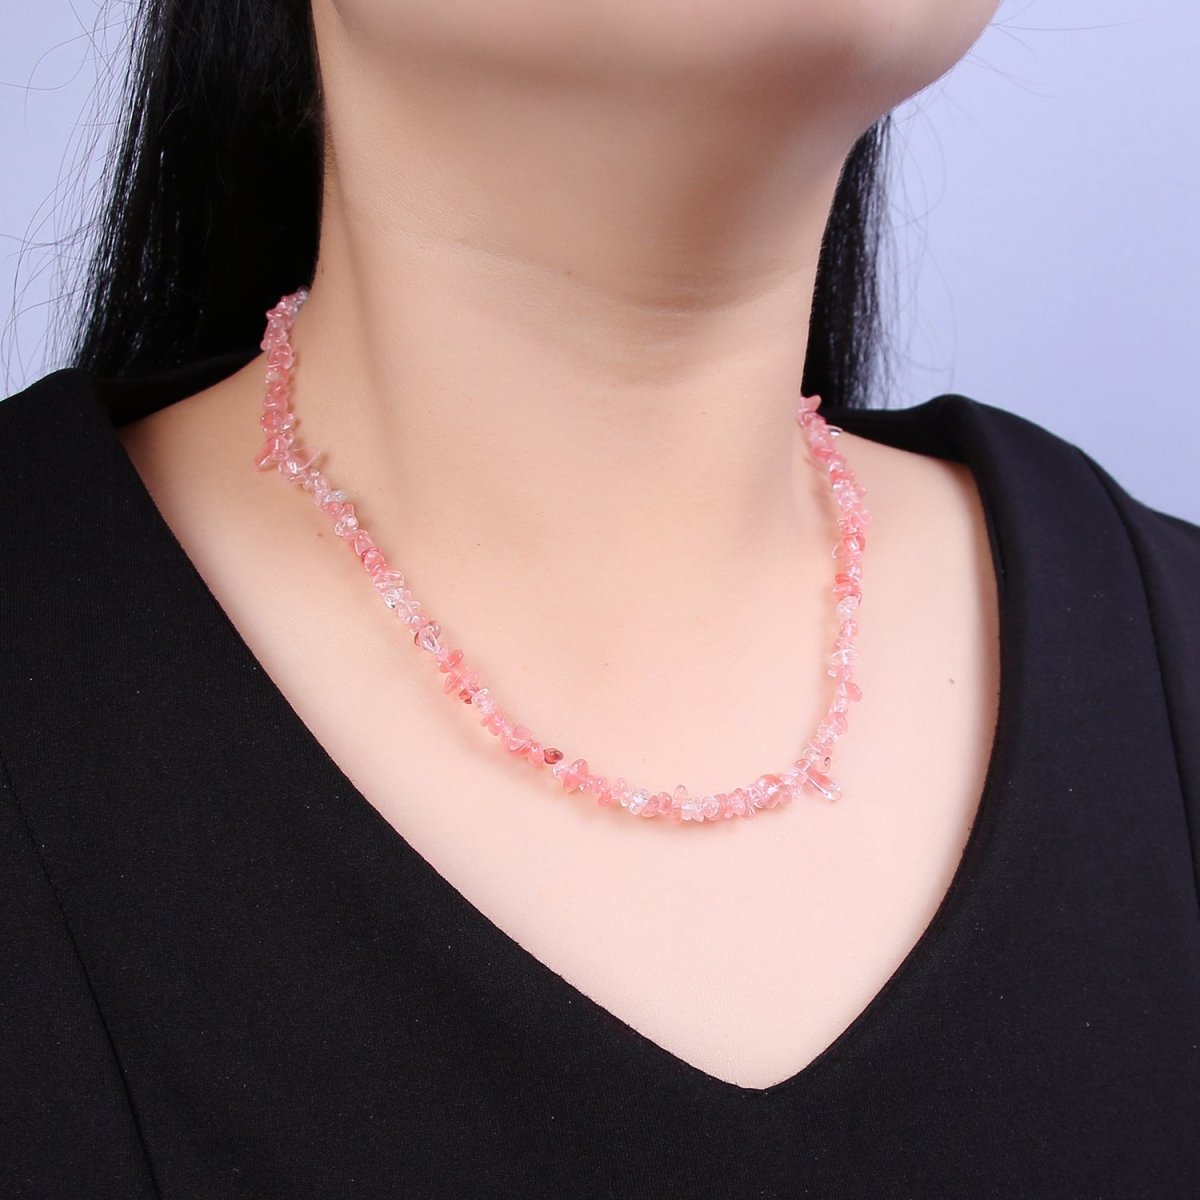 17.7 Inch Natural Watermelon Quartz Crystal Stone Bead Necklace with 2" Extender | WA-634 Clearance Pricing - DLUXCA